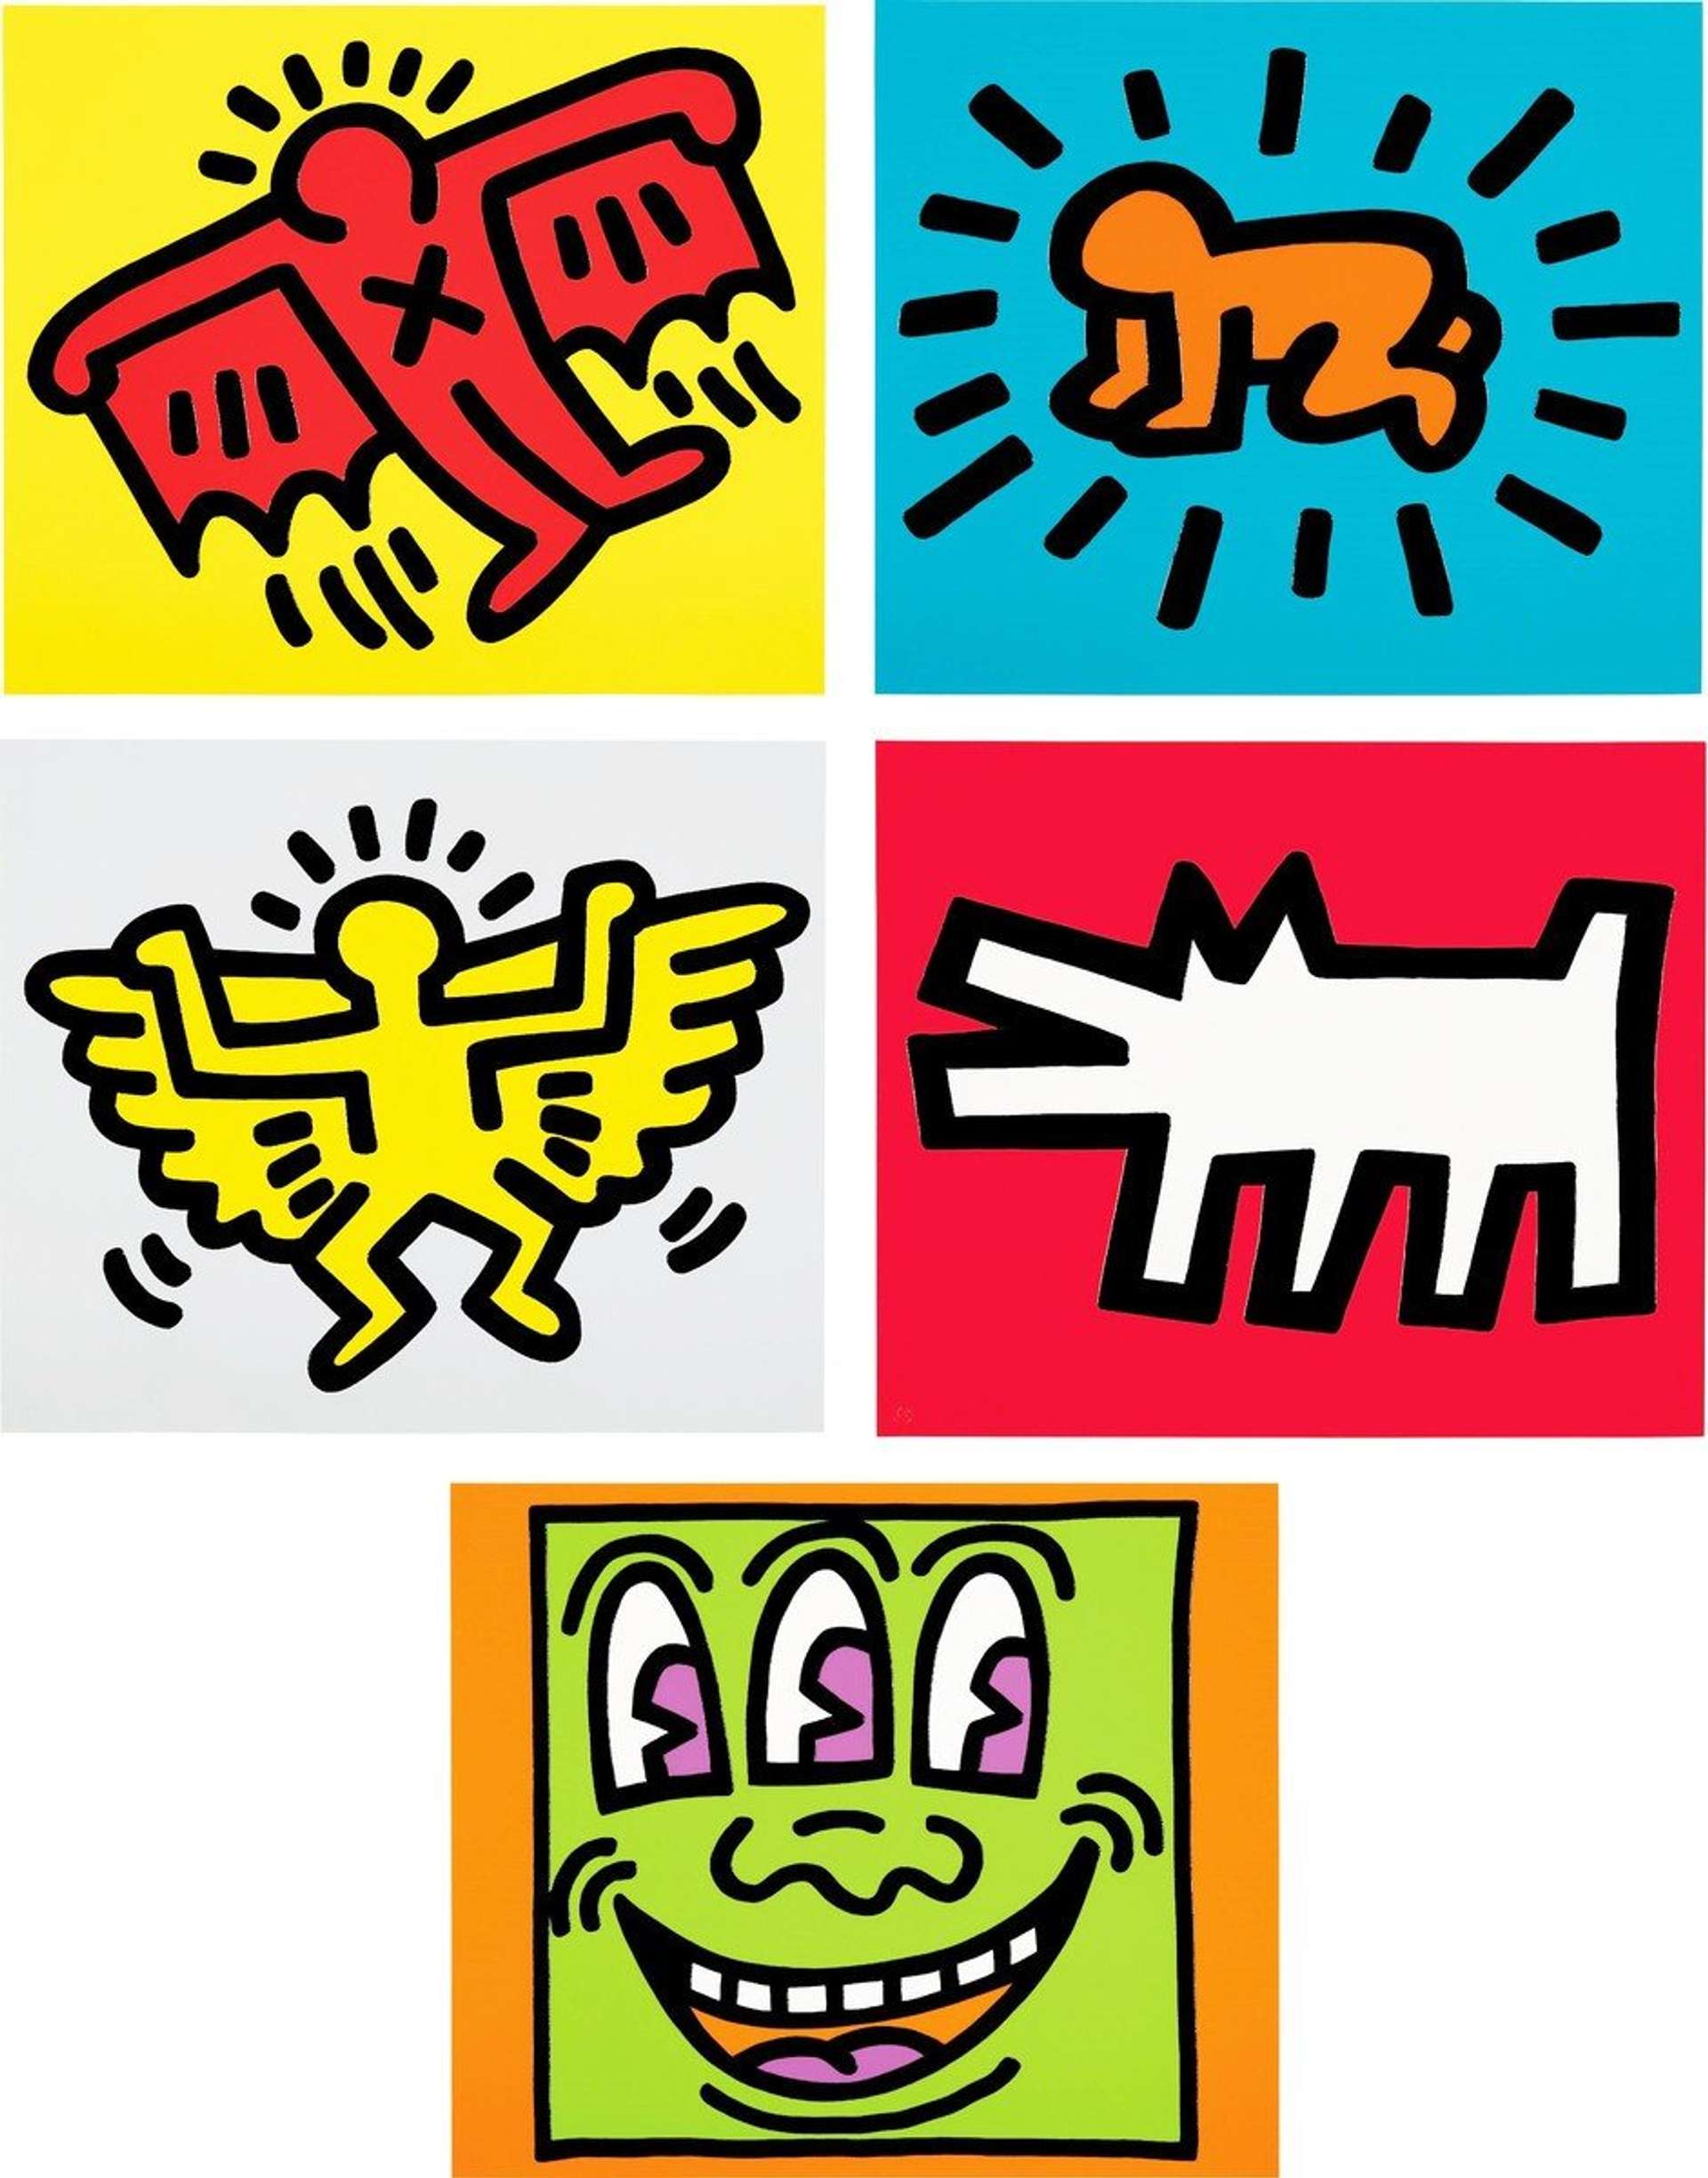 Icons by Keith Haring